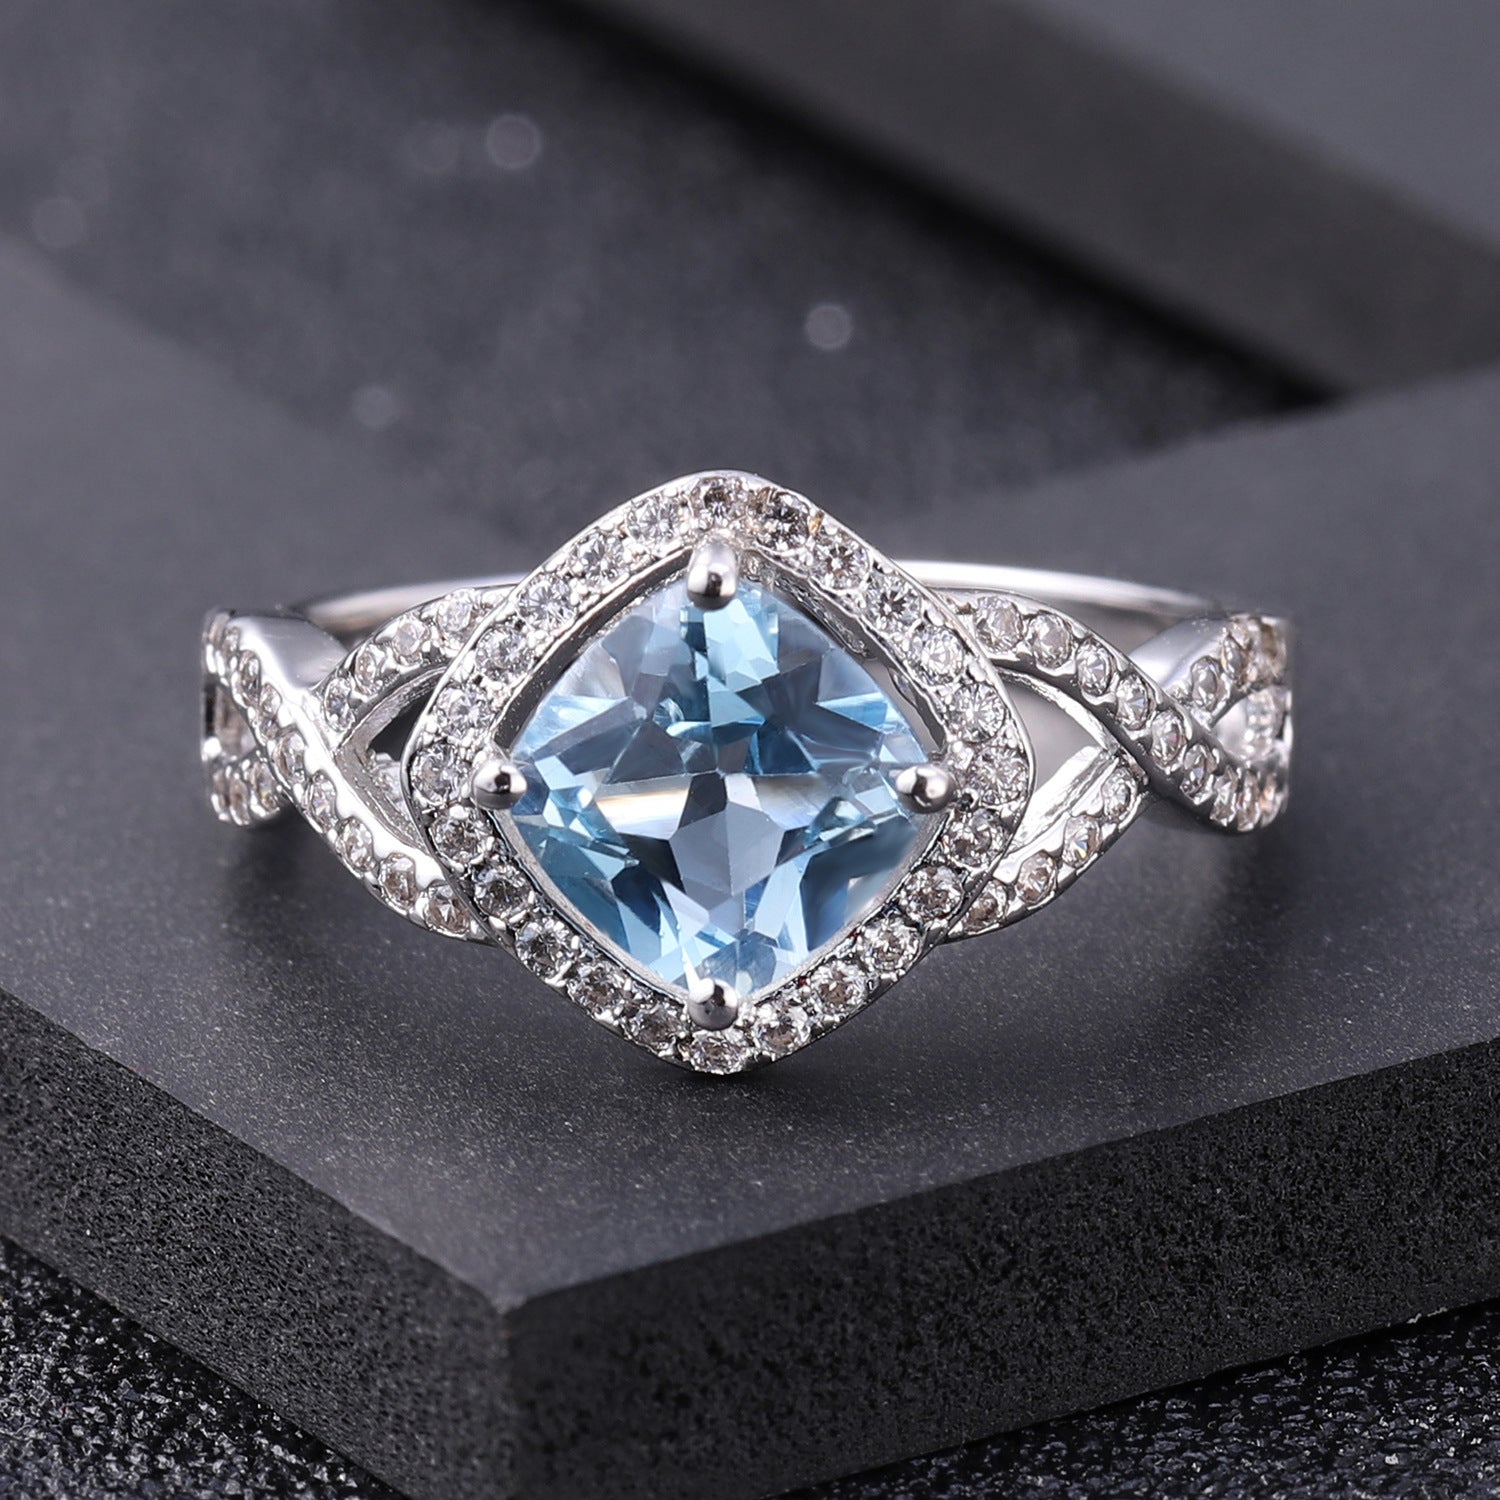 Light Luxury Temperament Inlaid Natural Topaz Soleste Halo Square Sterling Silver Ring for Women